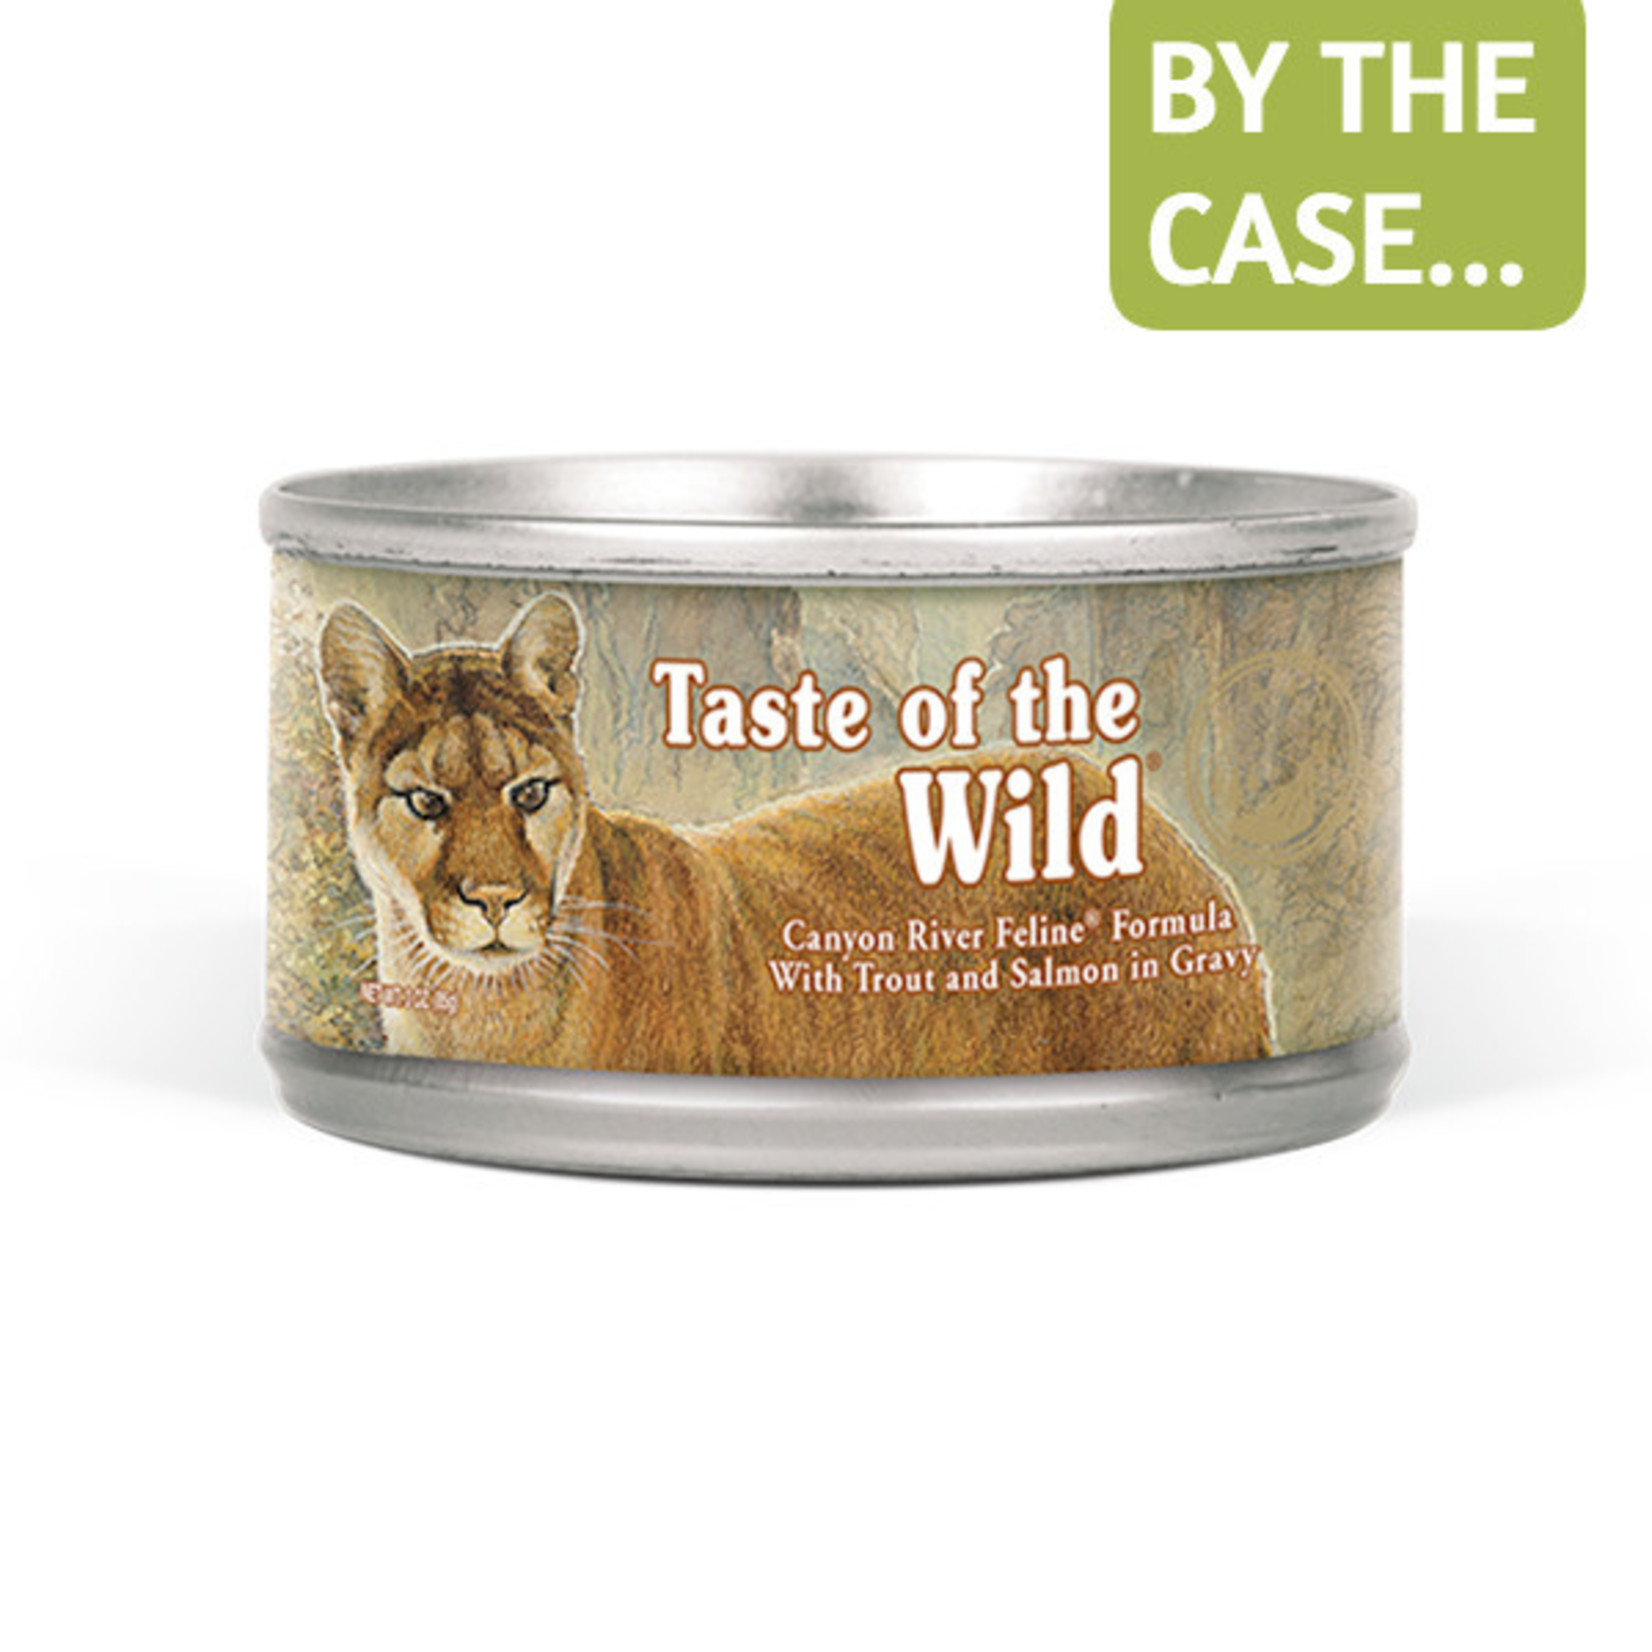 Taste of the Wild Taste of the Wild Wet Cat Food Canyon River Formula with Trout & Salmon in Gravy 3oz Can Grain Free